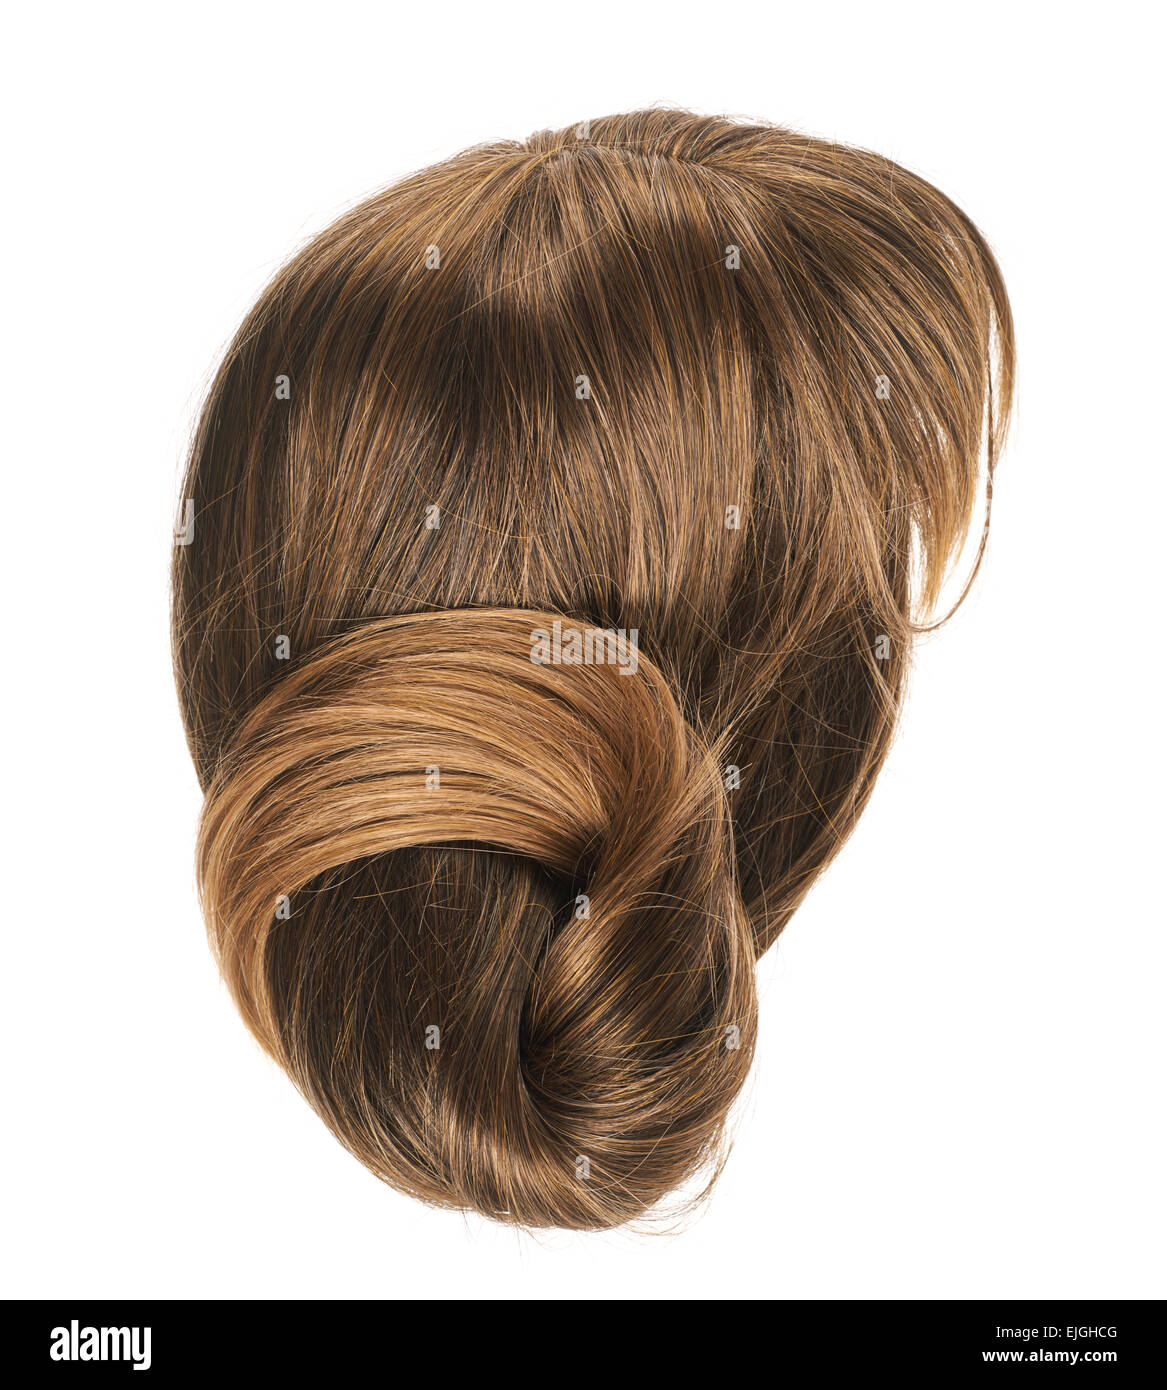 Hair wig isolated Stock Photo